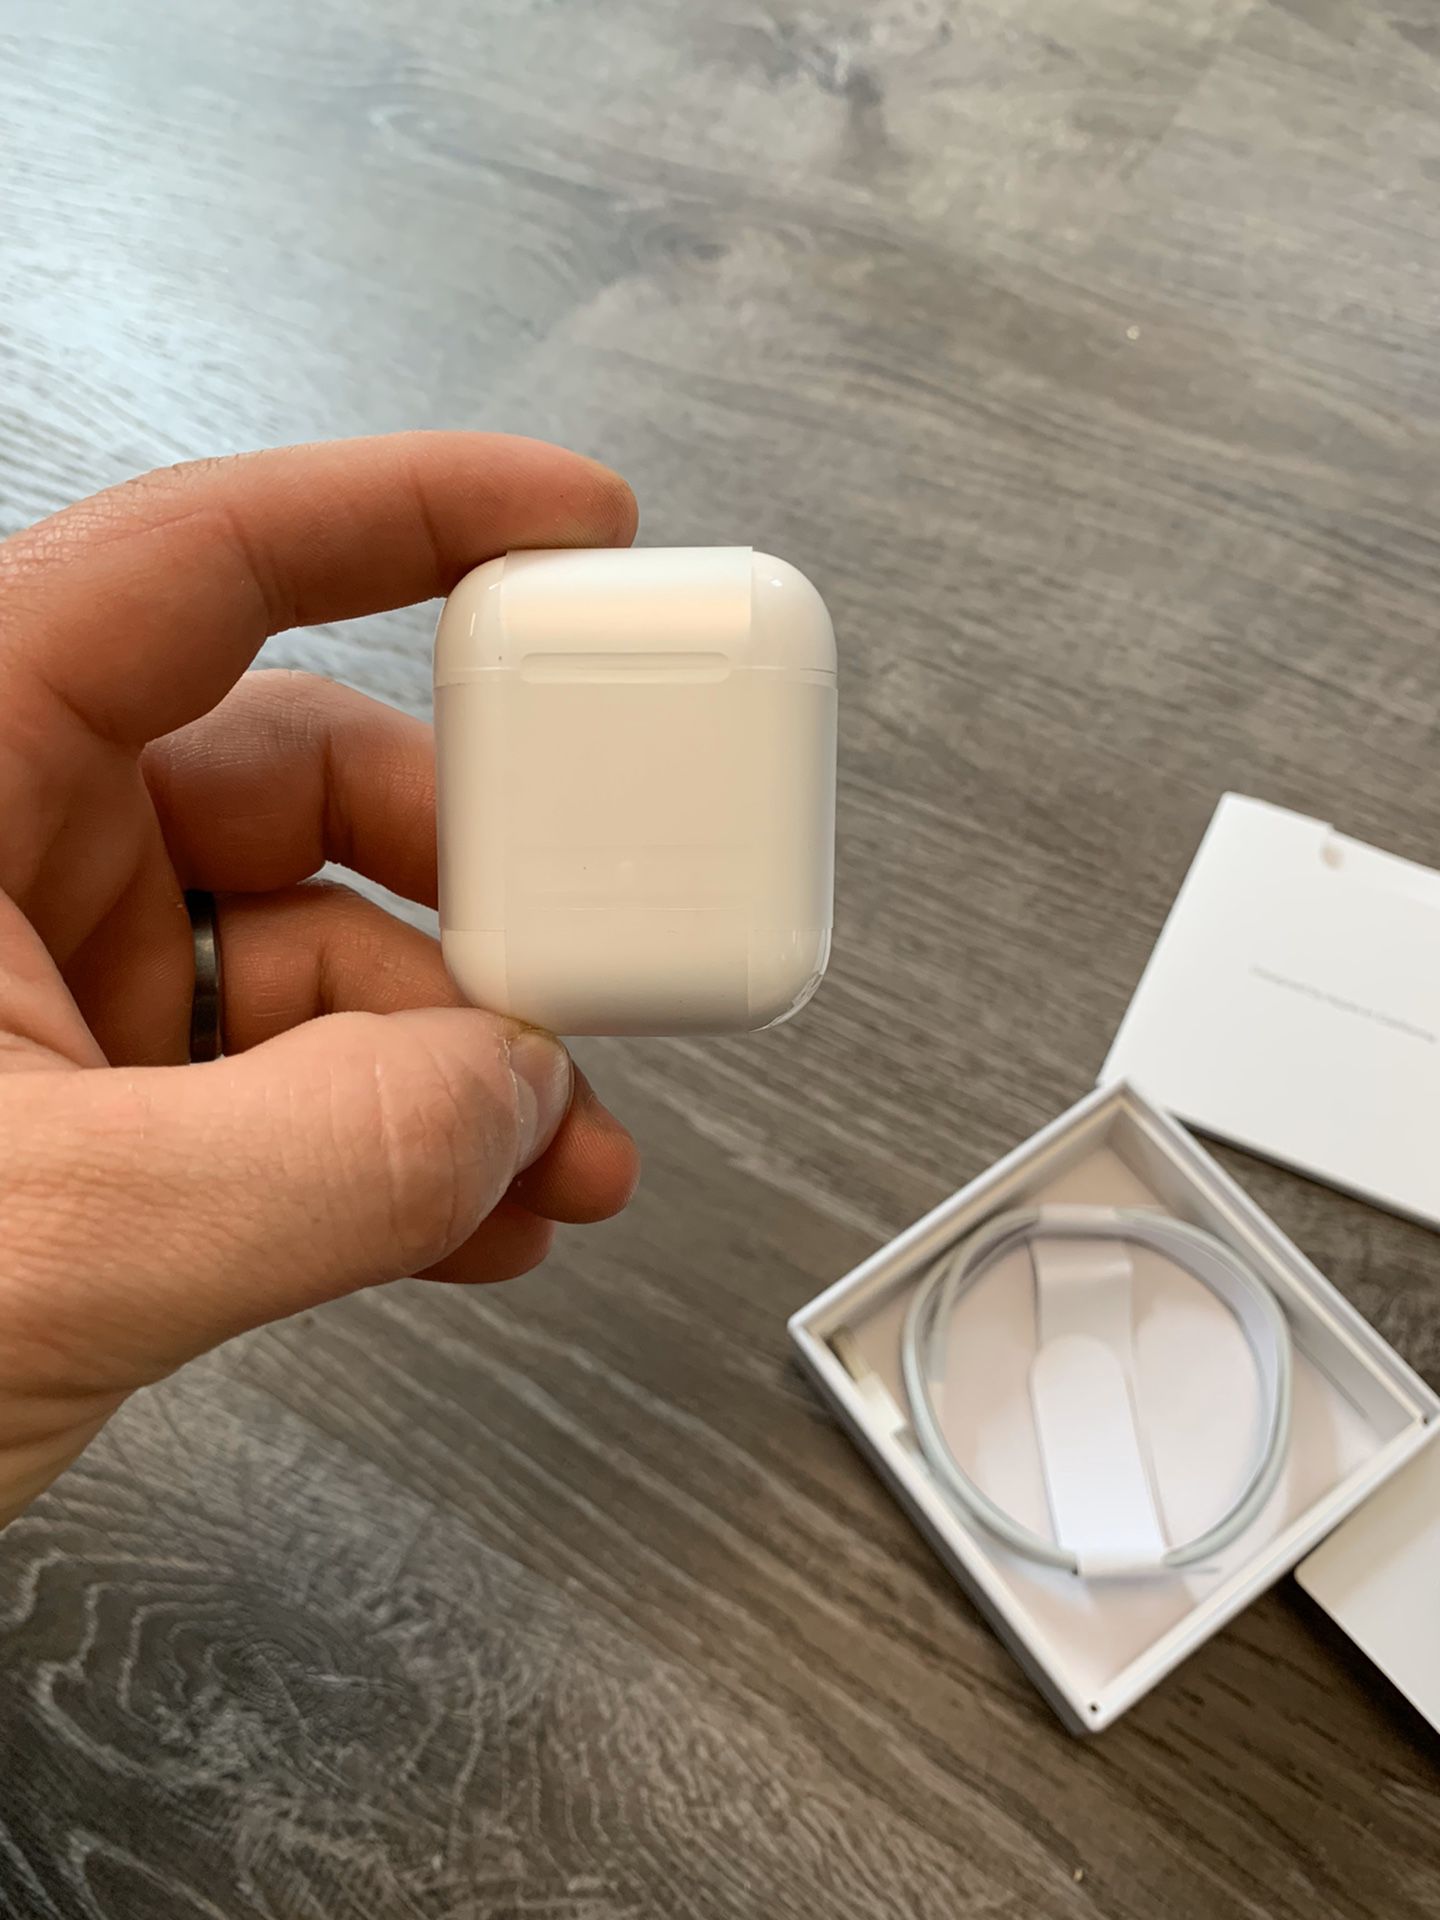 Apple air pods 1st gen with charging case